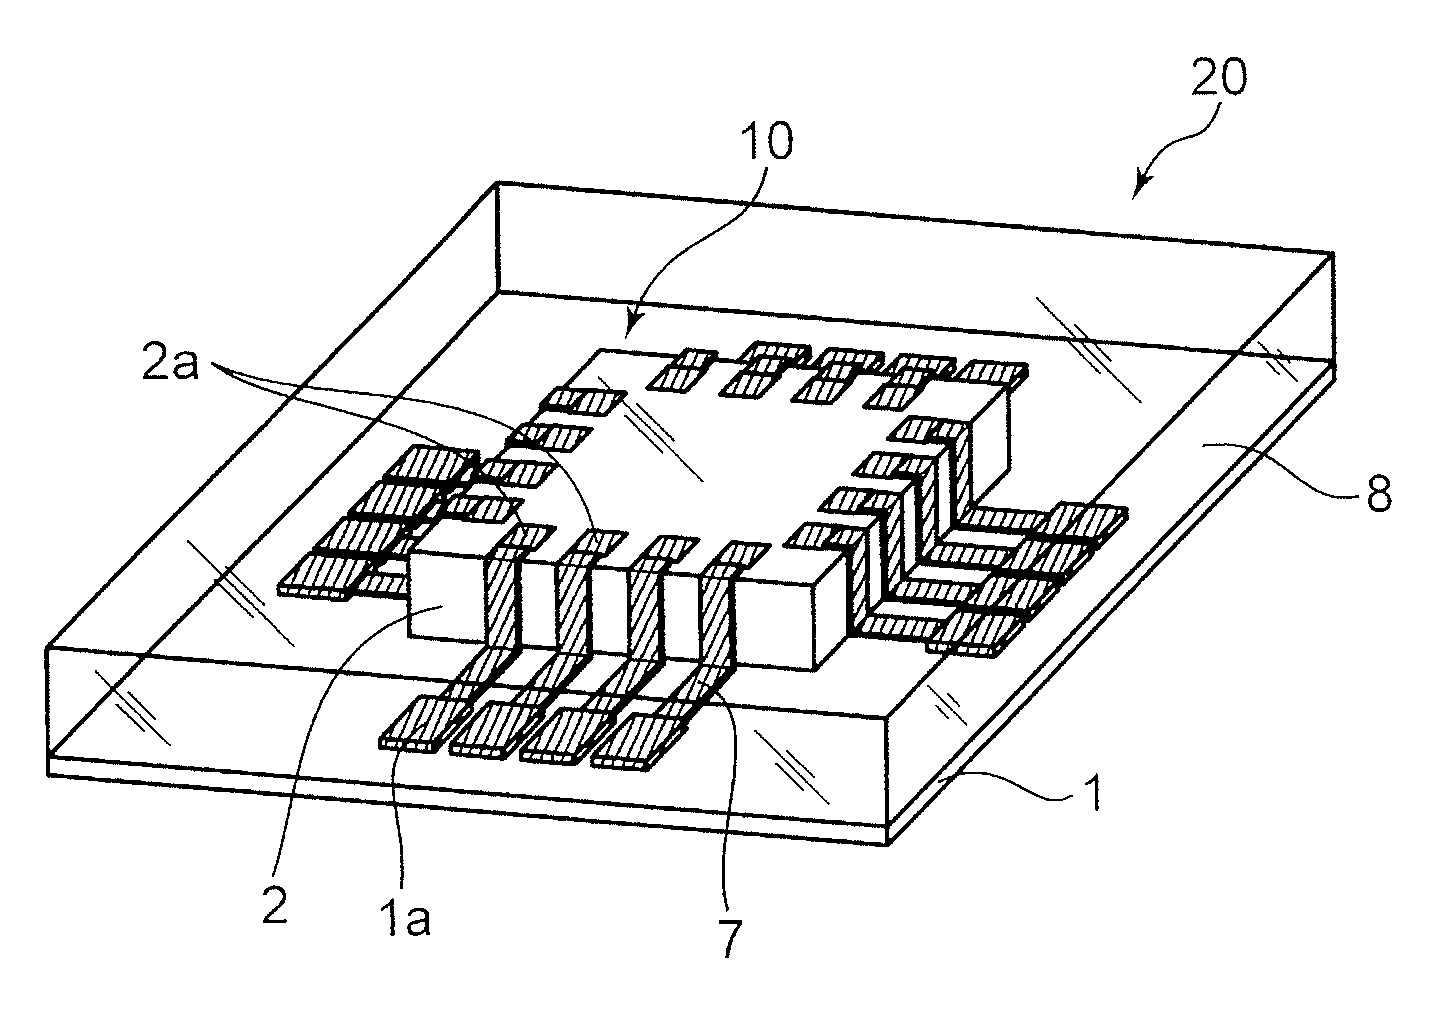 Three-dimensional structure in which wiring is provided on its surface